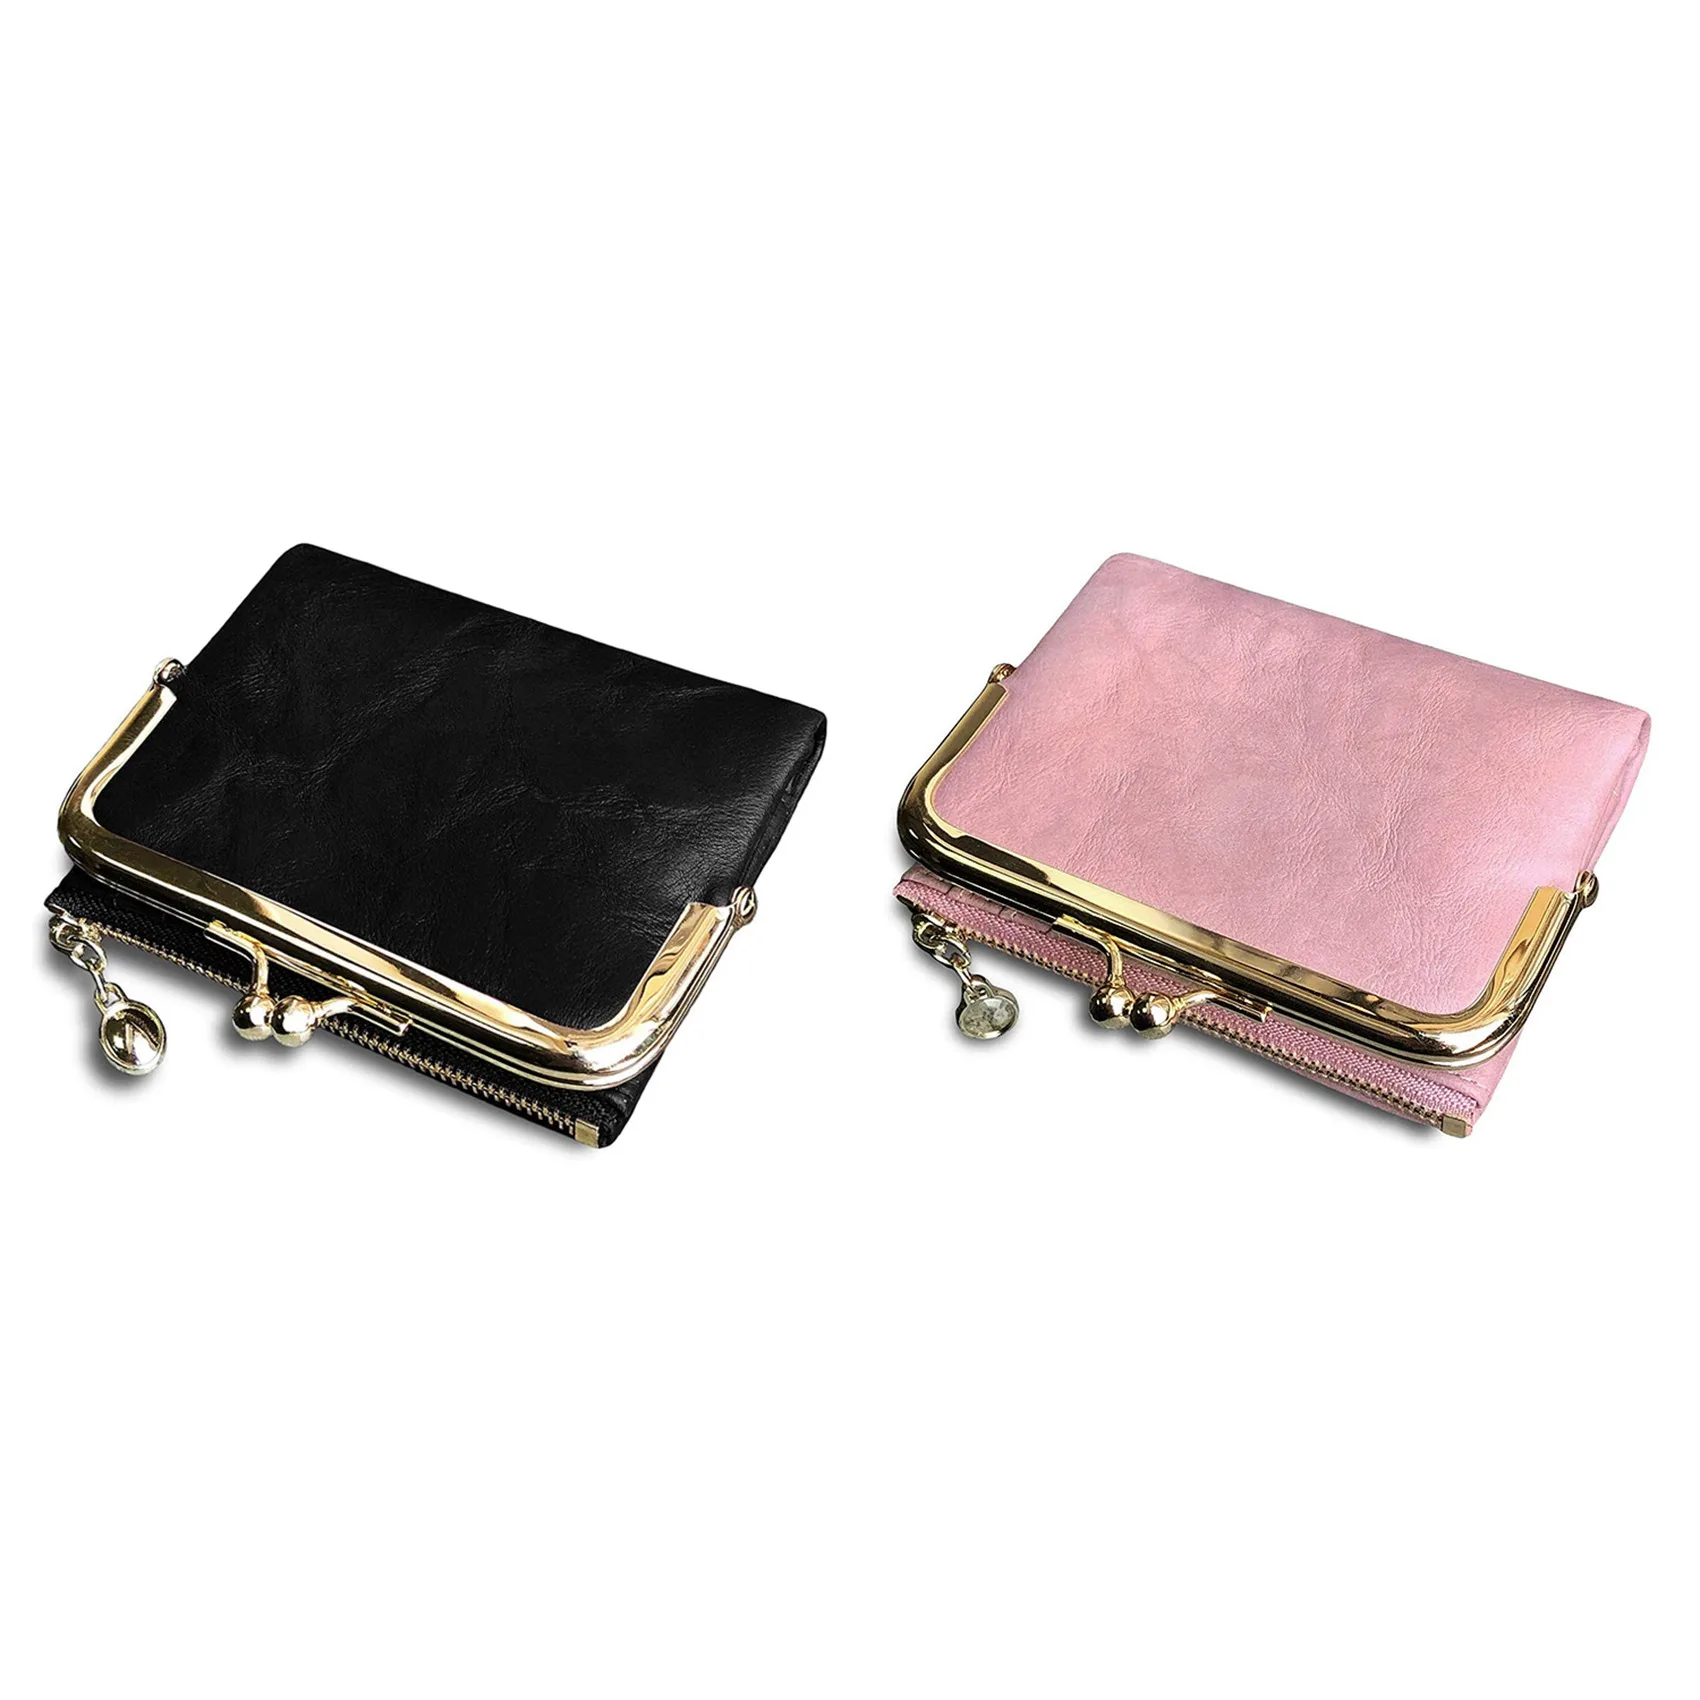 

2 Pcs Women'S Short Wallet Bifold Retro Multifunction Coin Purse with Zip and Kiss Lock, Black & Pink